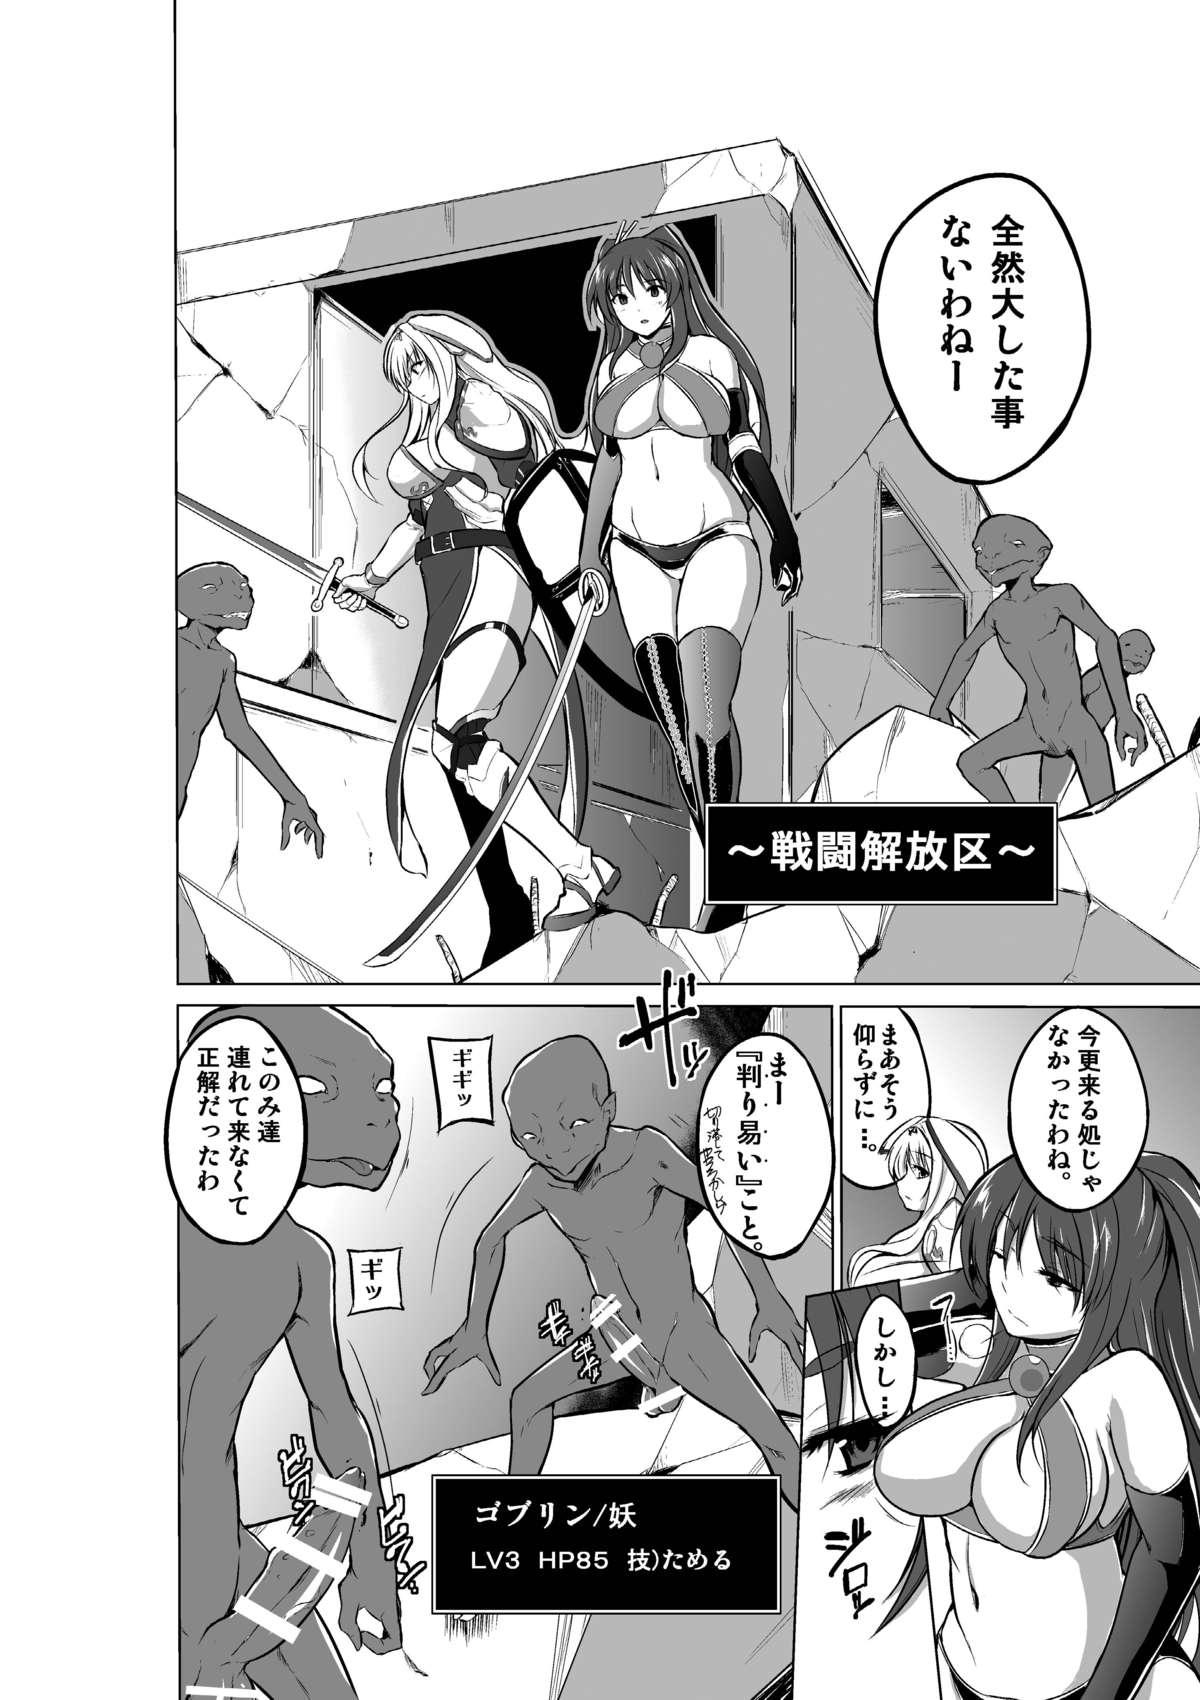 Cum On Pussy Dungeon Travelers - Sasara no Himegoto 2 - Toheart2 Casal - Page 4